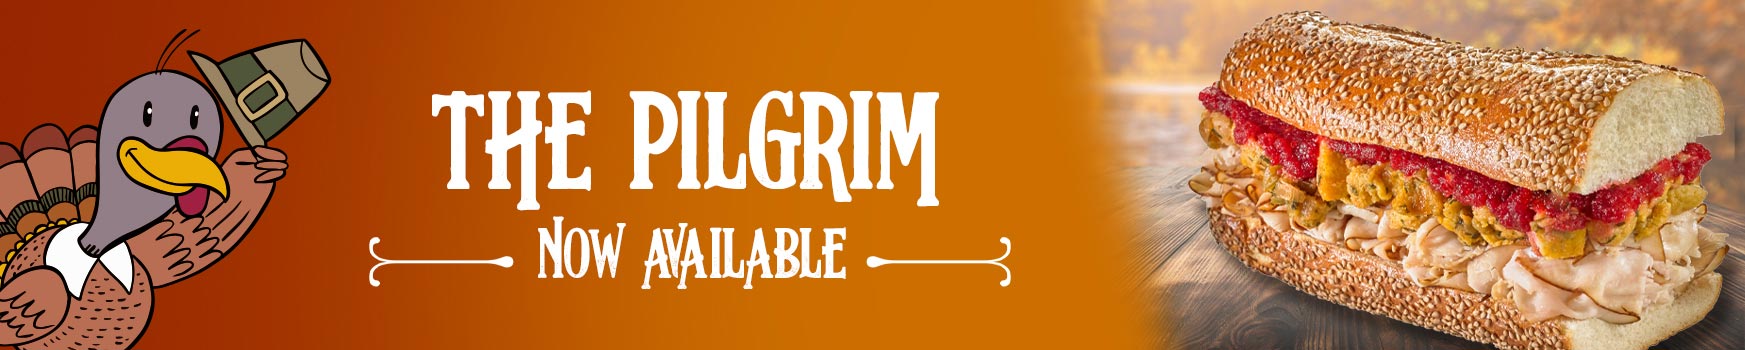 The Pilgrim - Now Available